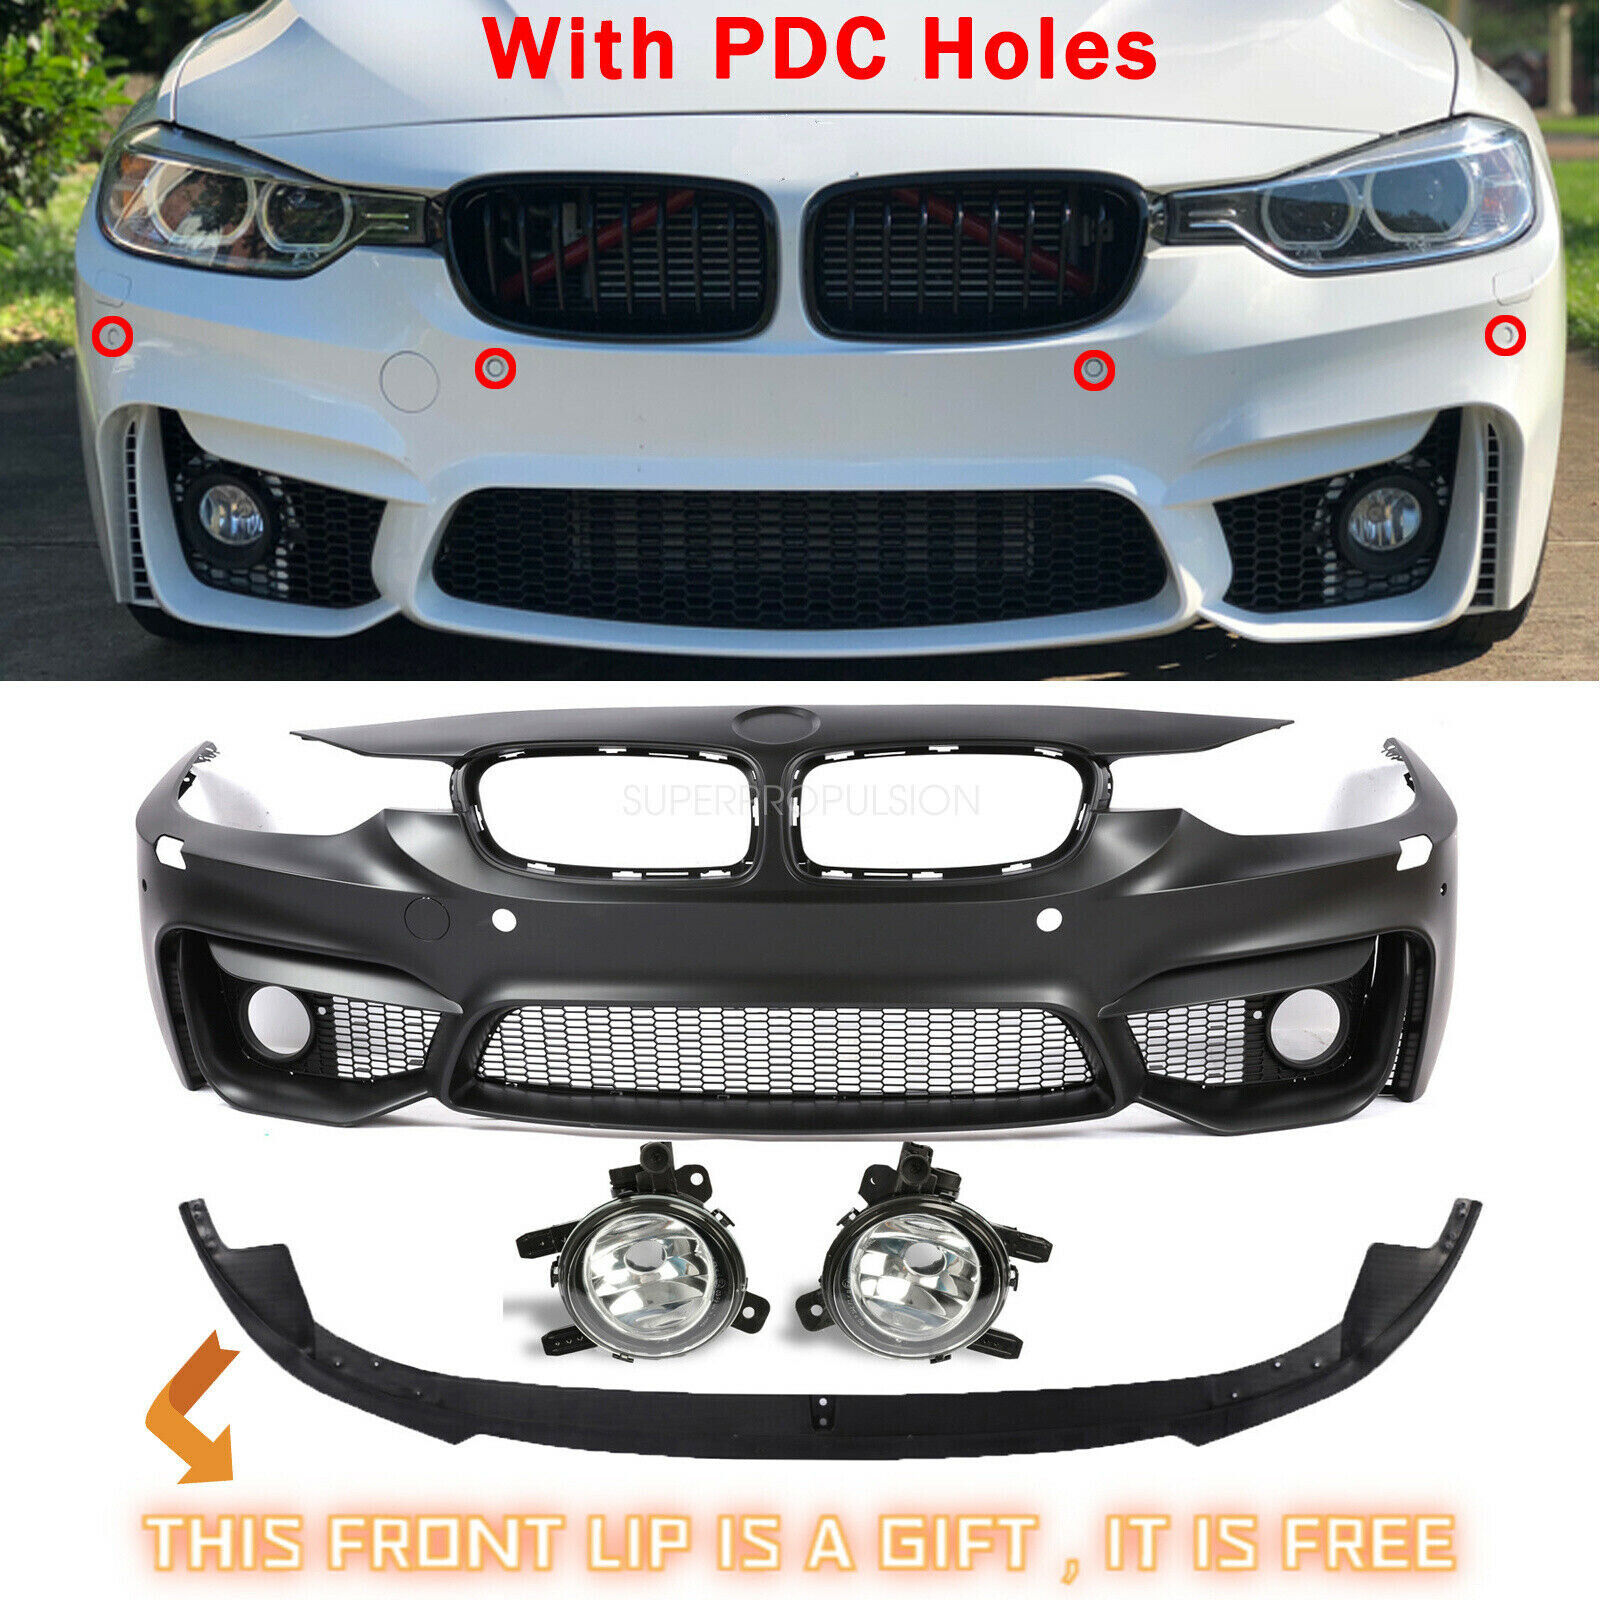 F30 M3 Style Look FRONT BUMPER FOR BMW F30 3 SERIES SEDAN & WAGON W/ PDC 12-18